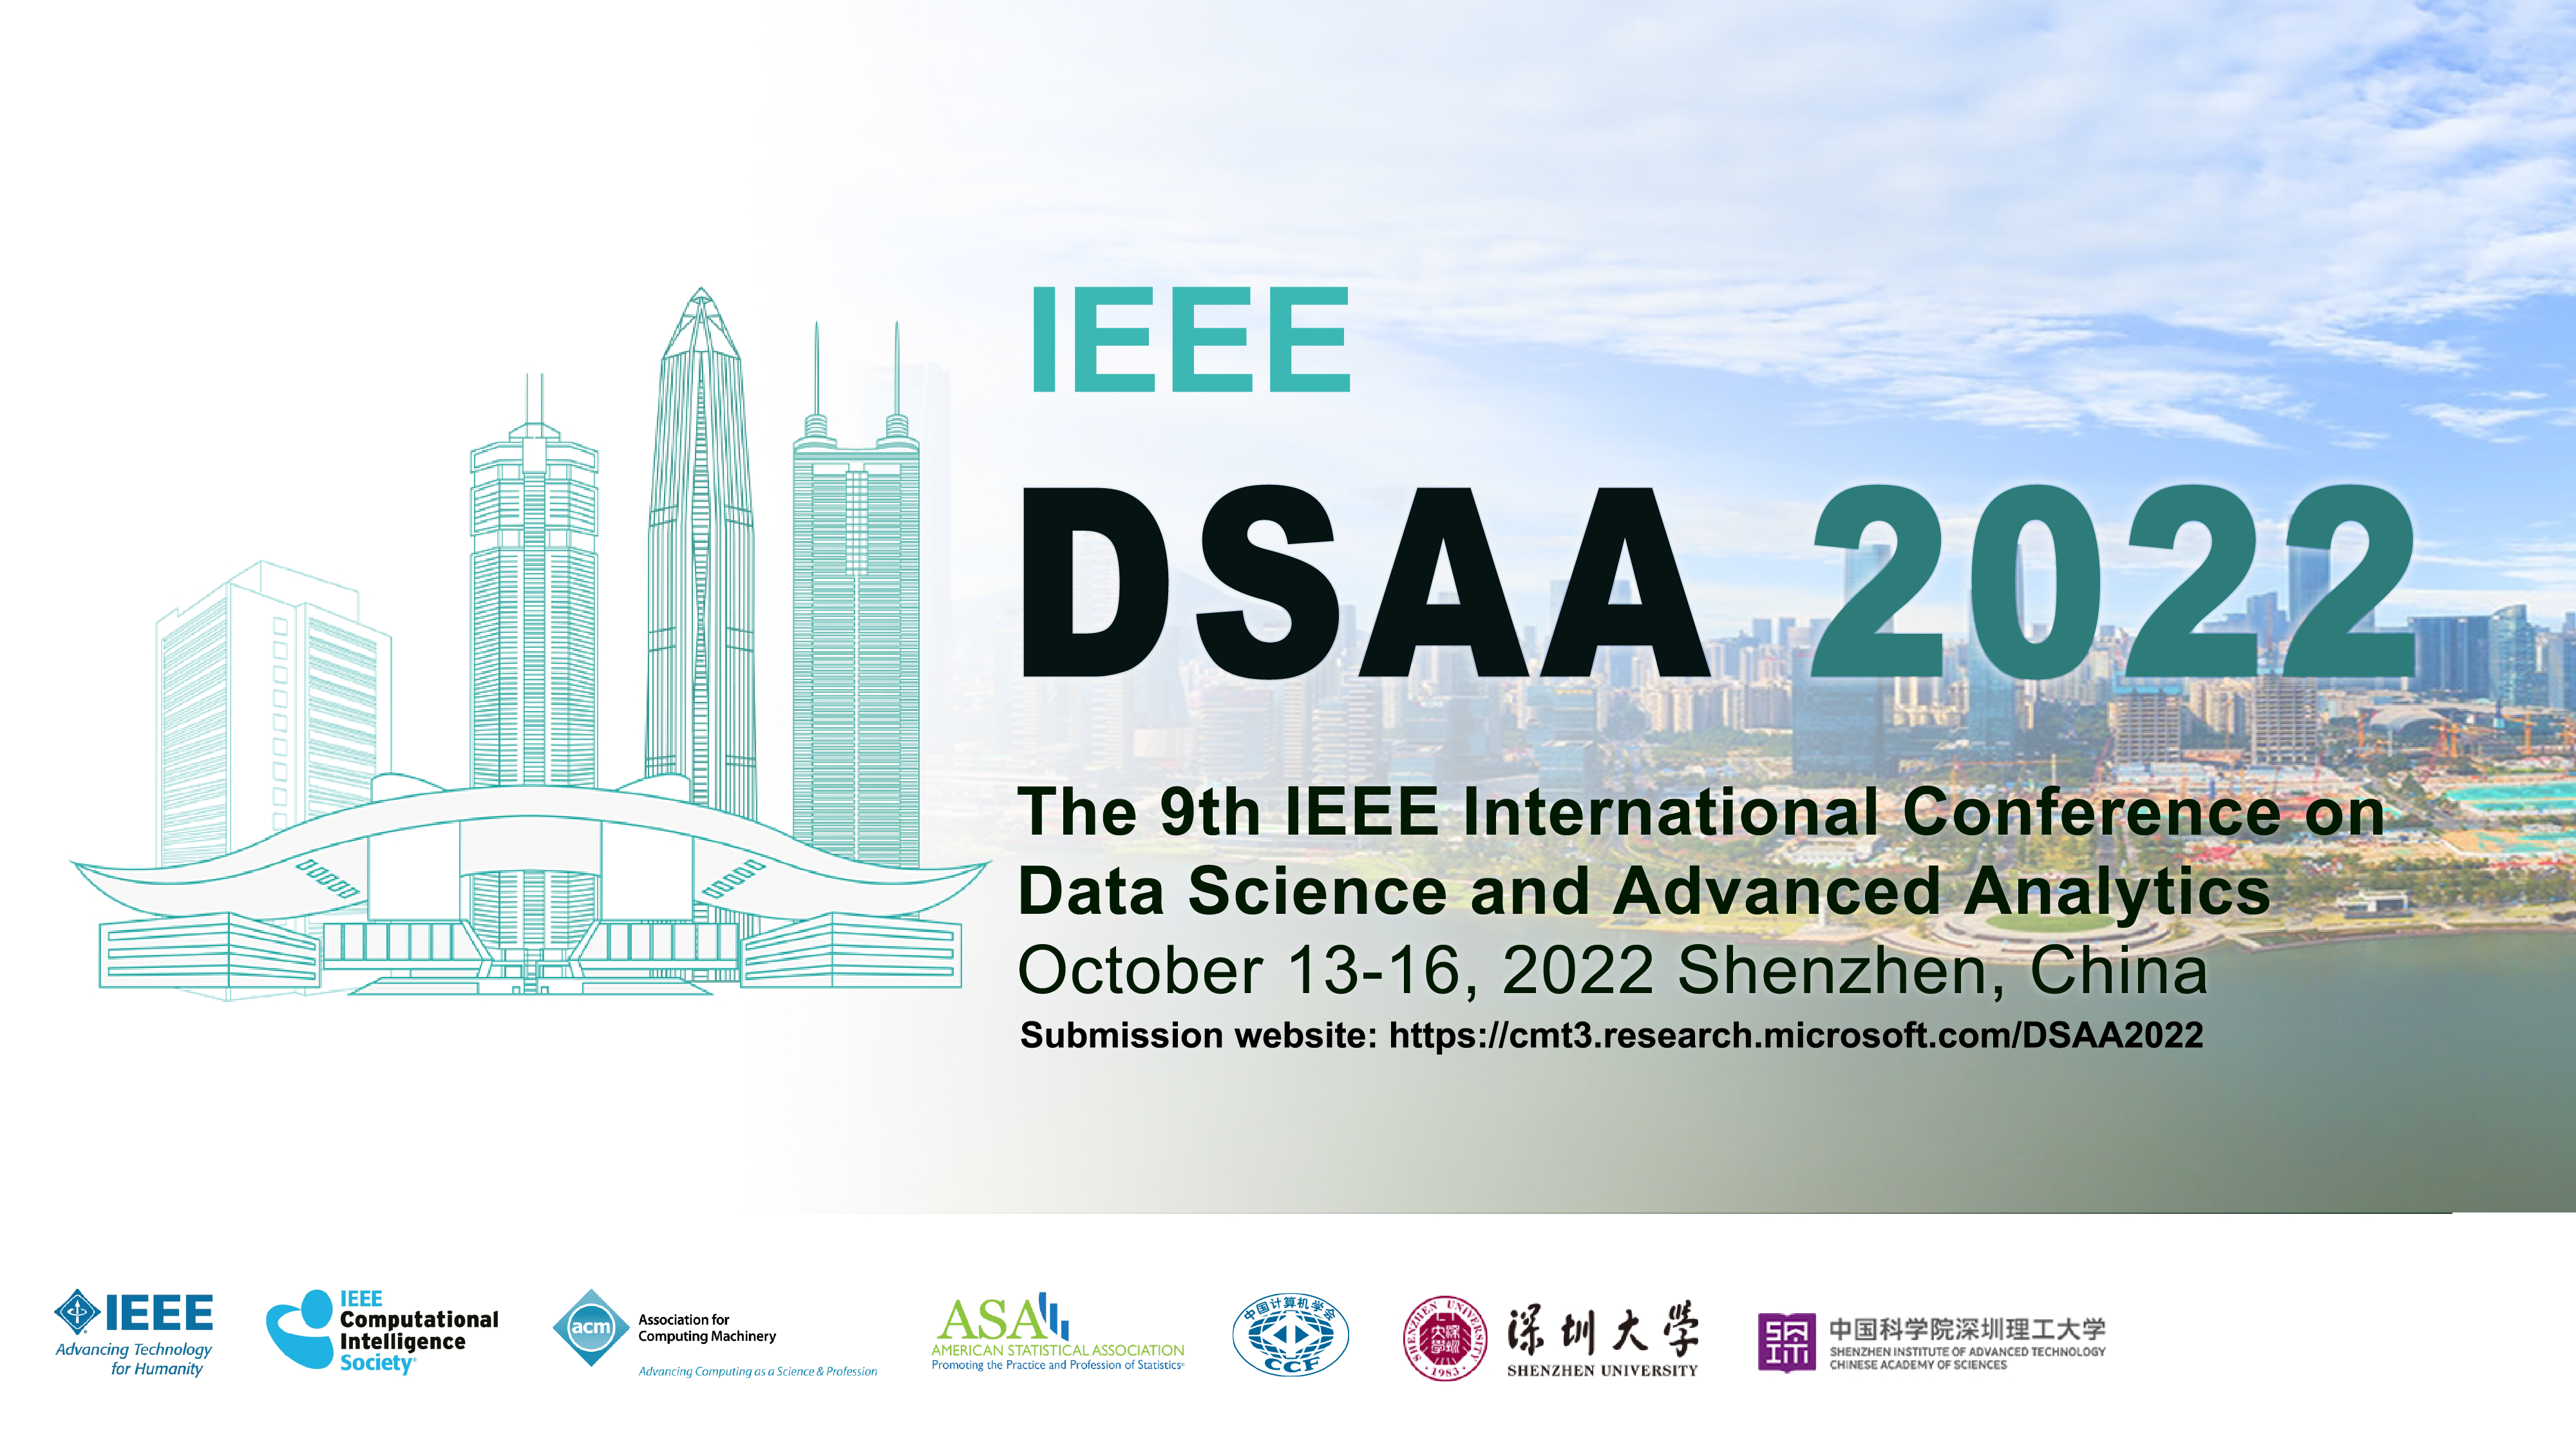 The 9th IEEE International Conference on Data Science and Advanced Analytics